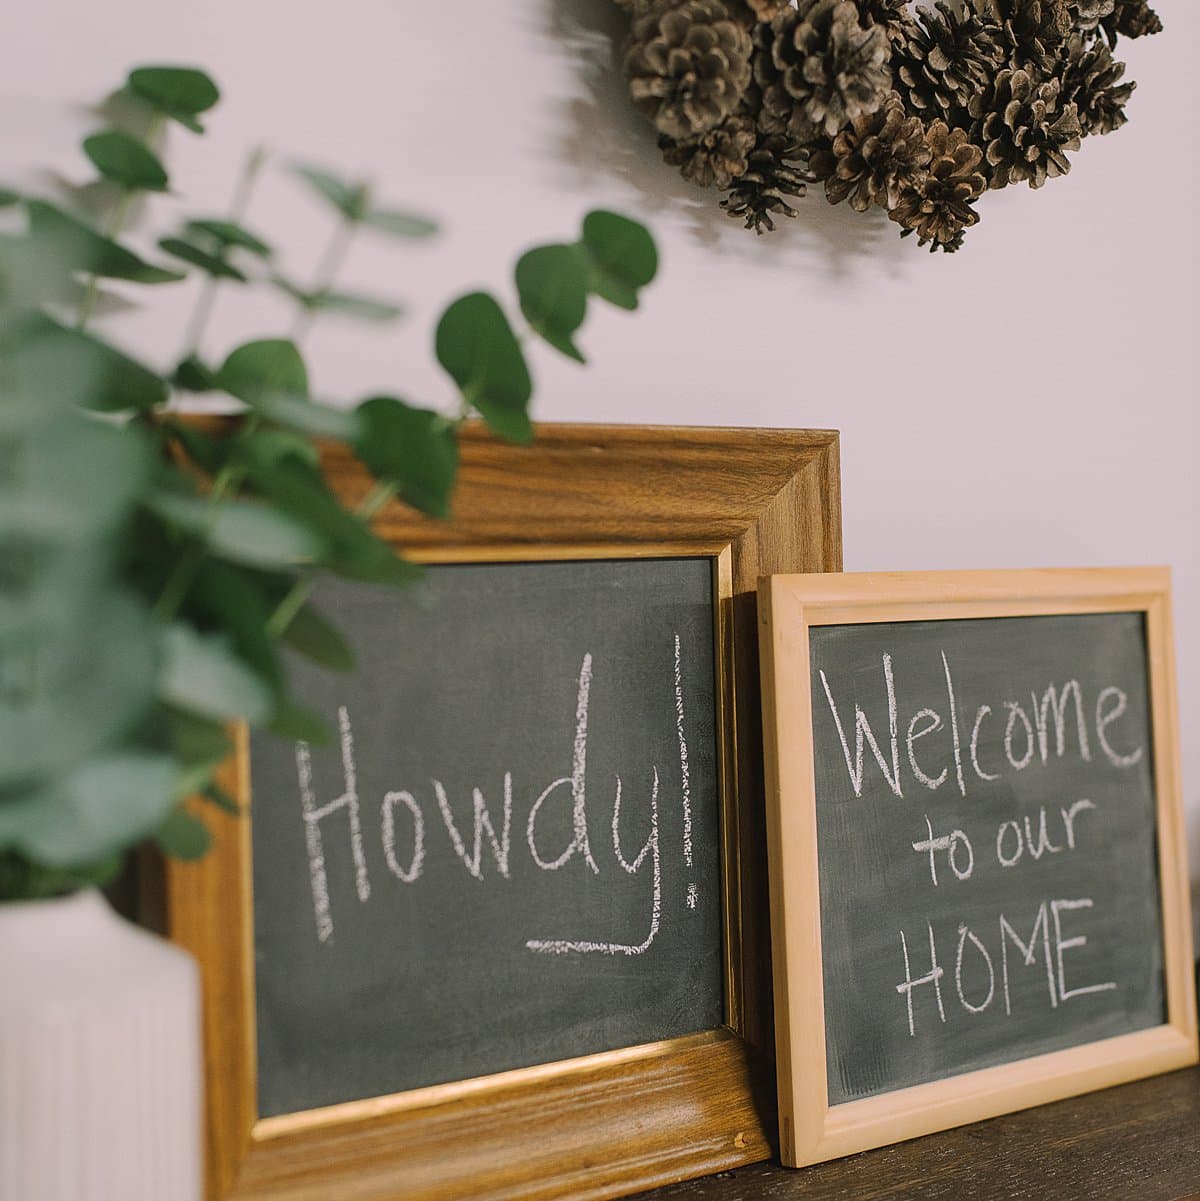 5 UNIQUE WAYS TO USE CHALKBOARD PAINT IN KIDS' SPACES! — WINTER DAISY